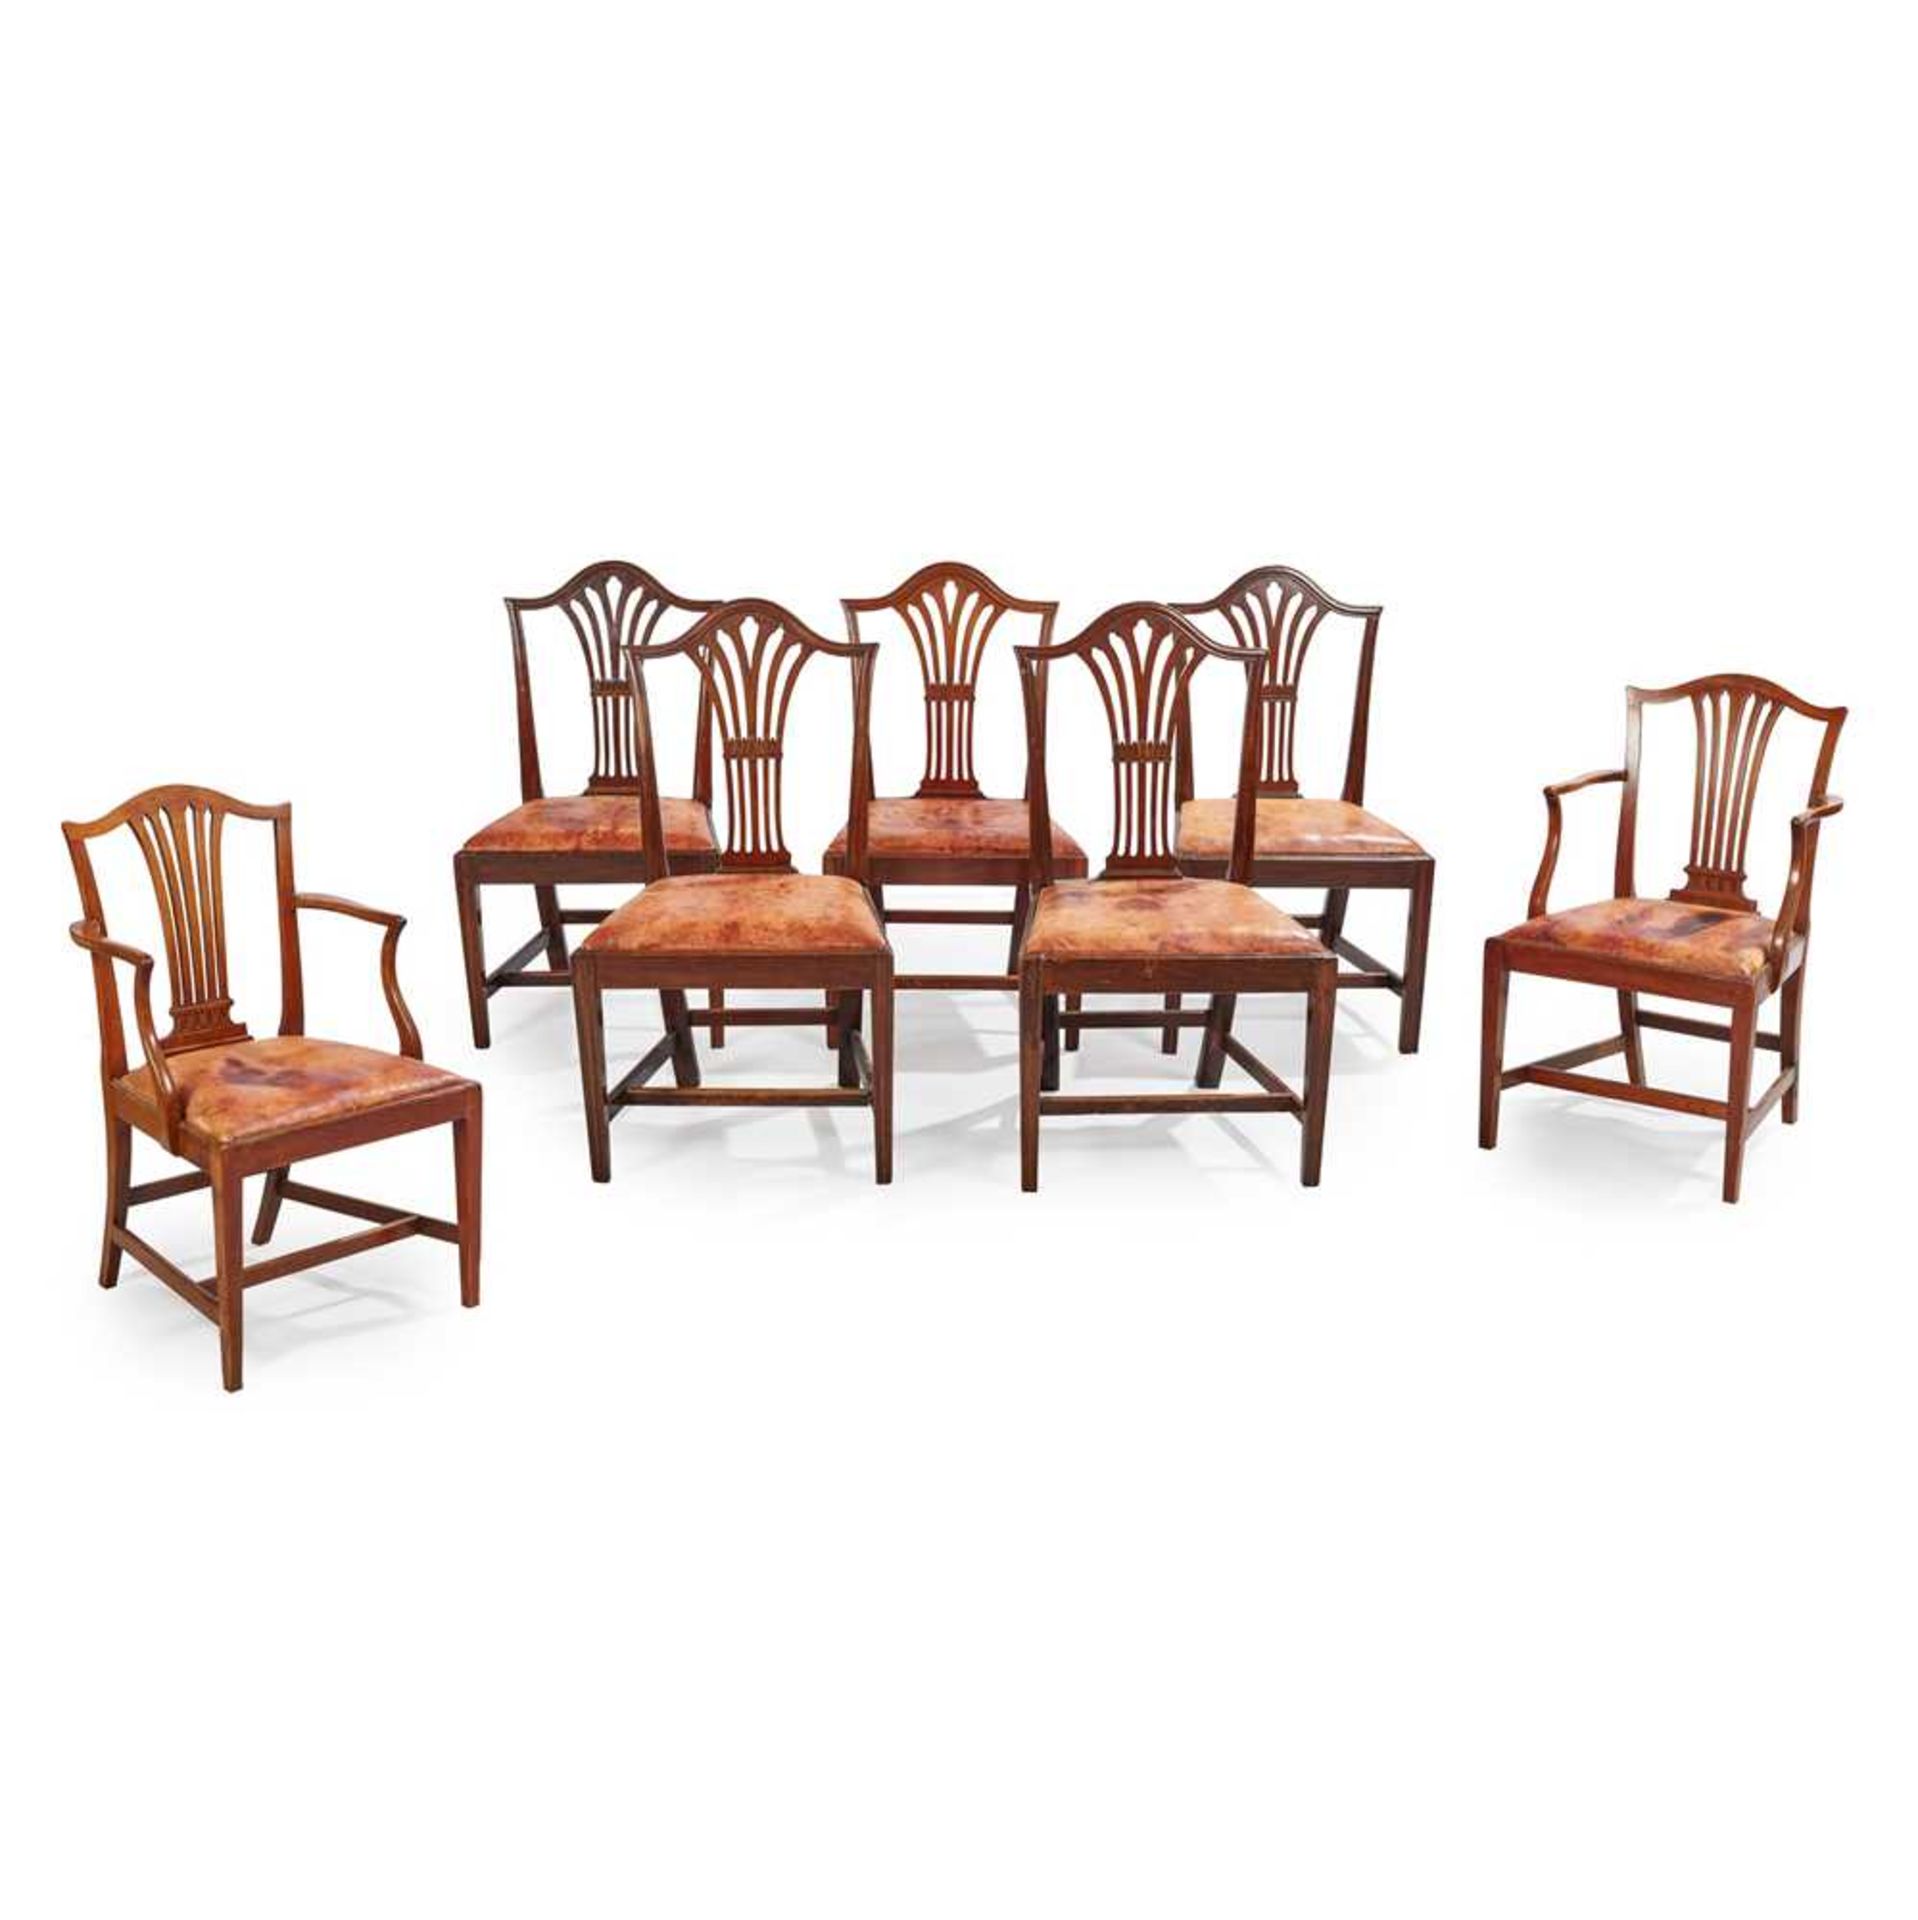 A SET OF FIVE GEORGIAN STYLE MAHOGANY DINING CHAIRS 19TH CENTURY